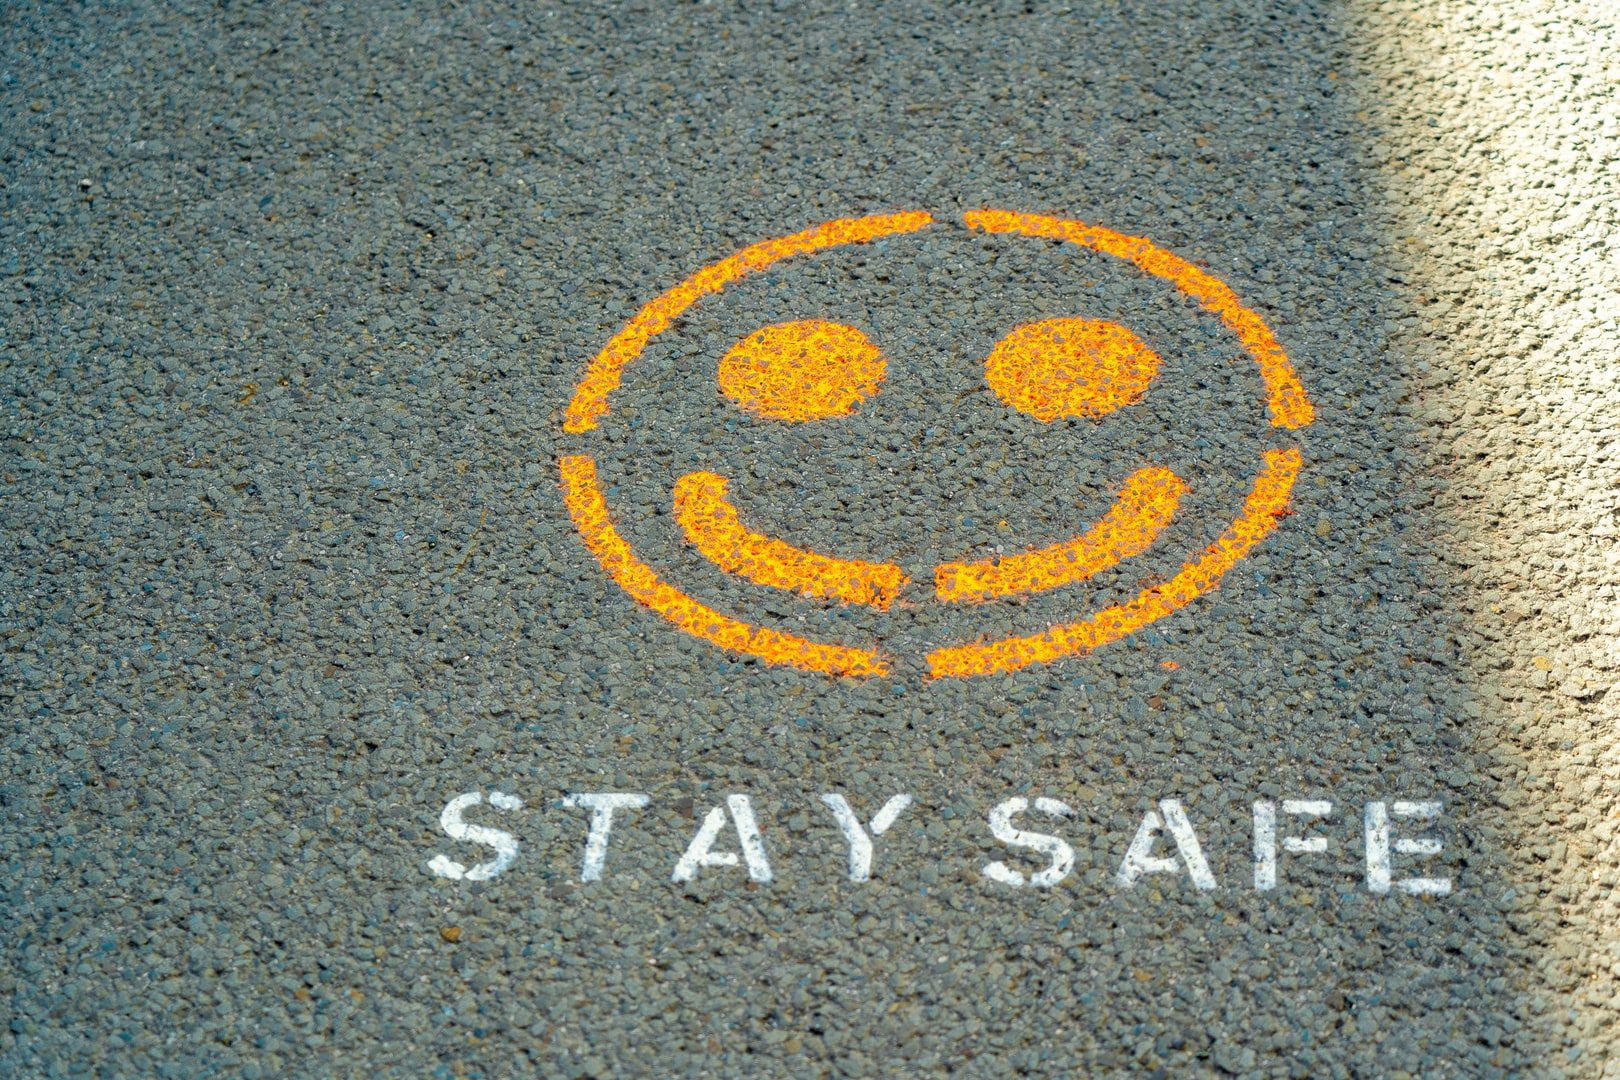 A smiley face emoji painted on a pavement with the words stay safe